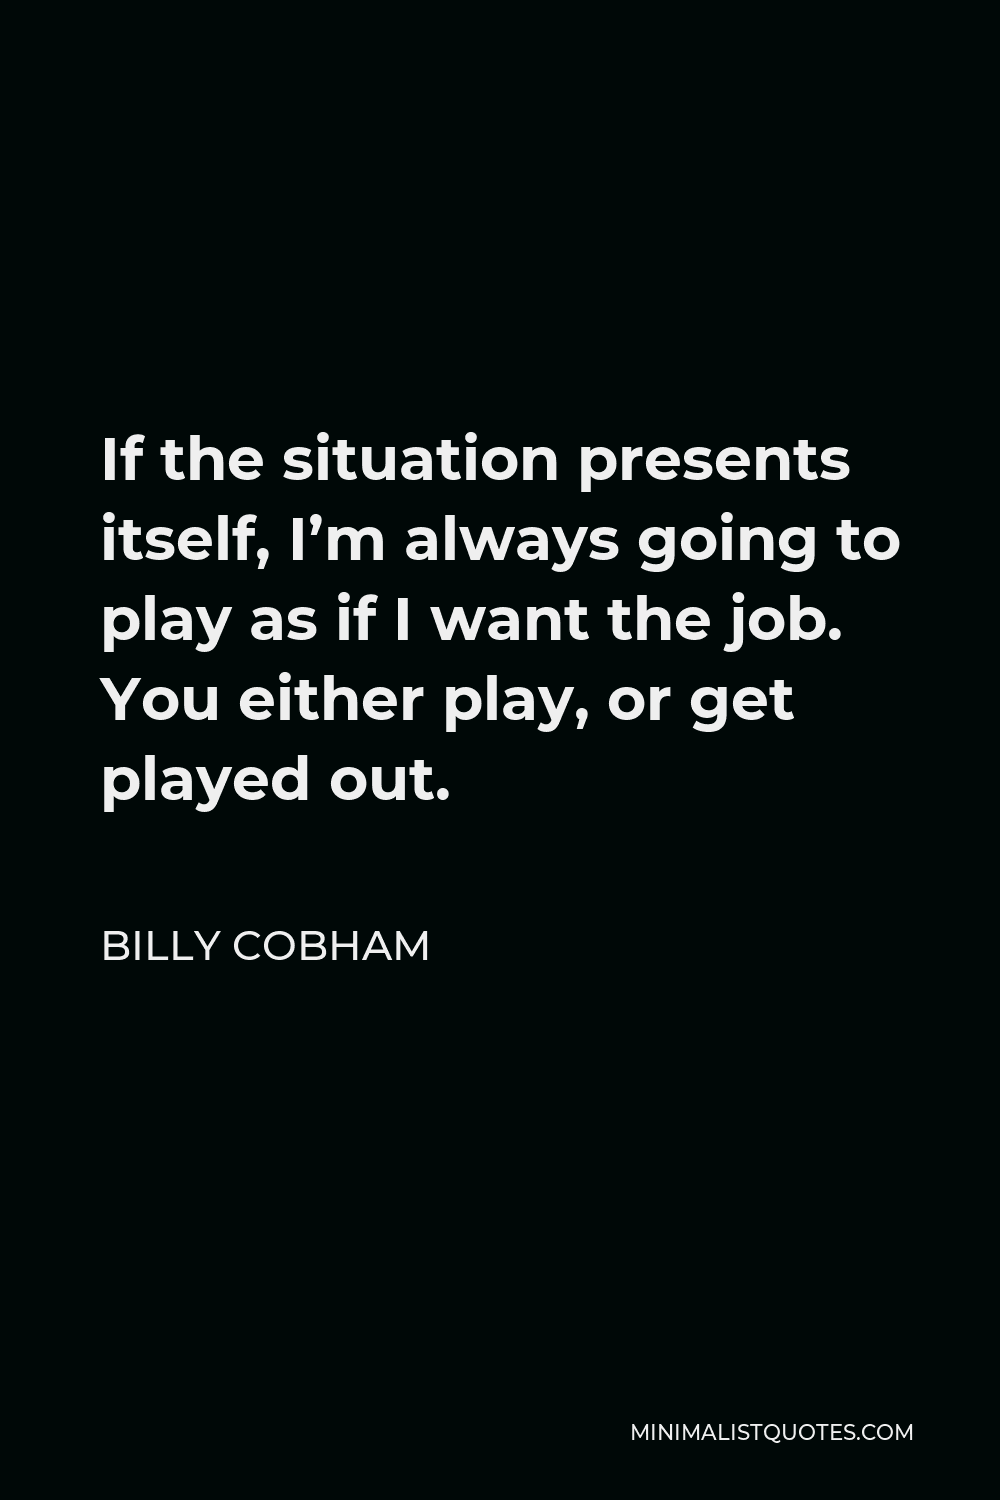 Billy Cobham Quote - If the situation presents itself, I’m always going to play as if I want the job. You either play, or get played out.